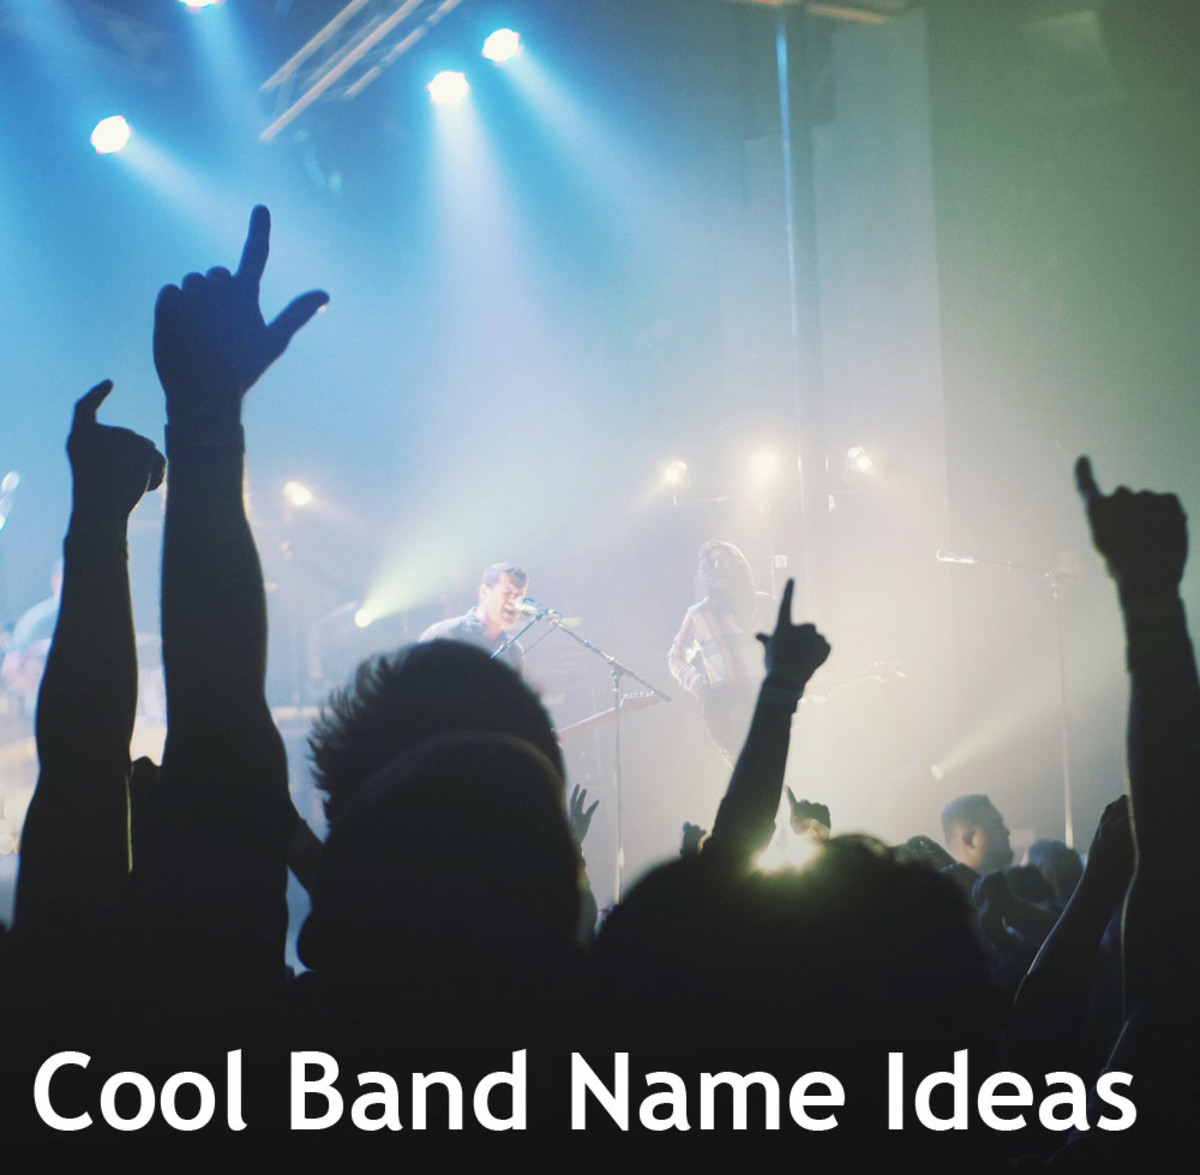 Band Name Ideas That Will Make Others Green With Envy